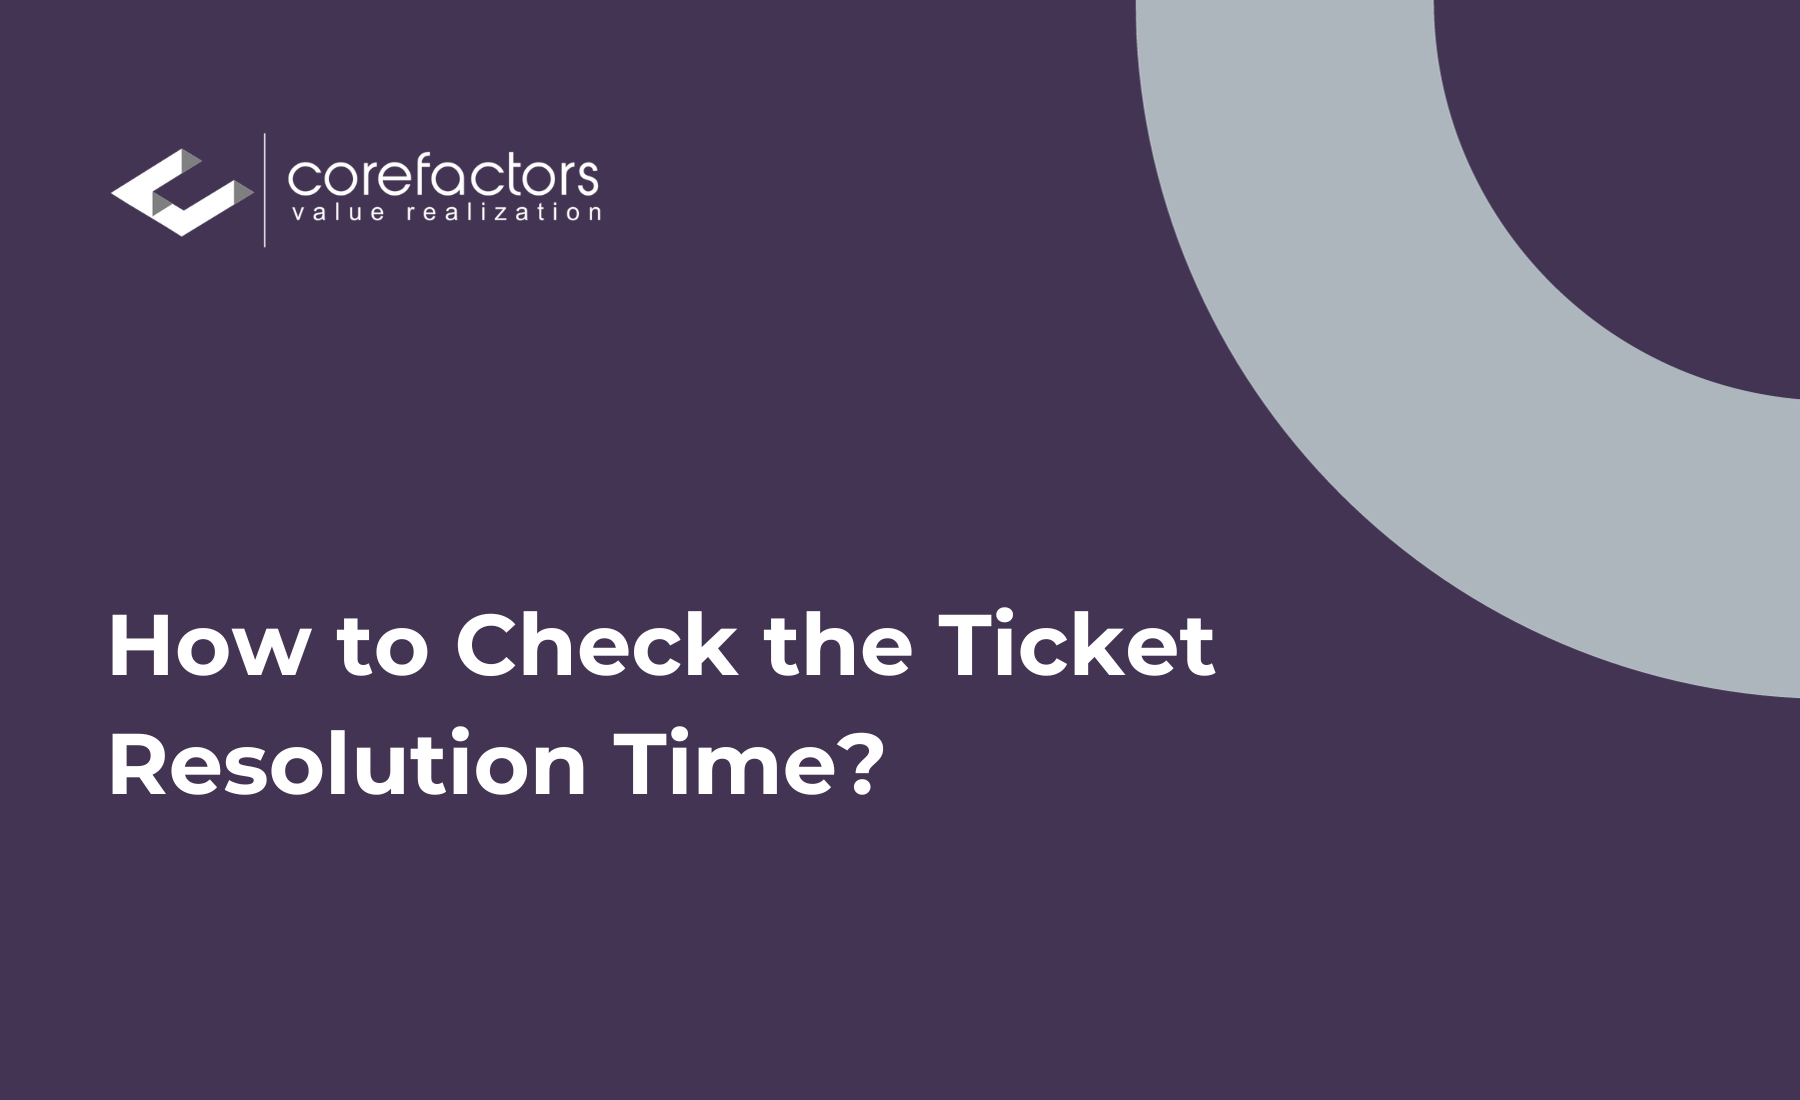 How to check the ticket resolution time in Corefactors CRM?